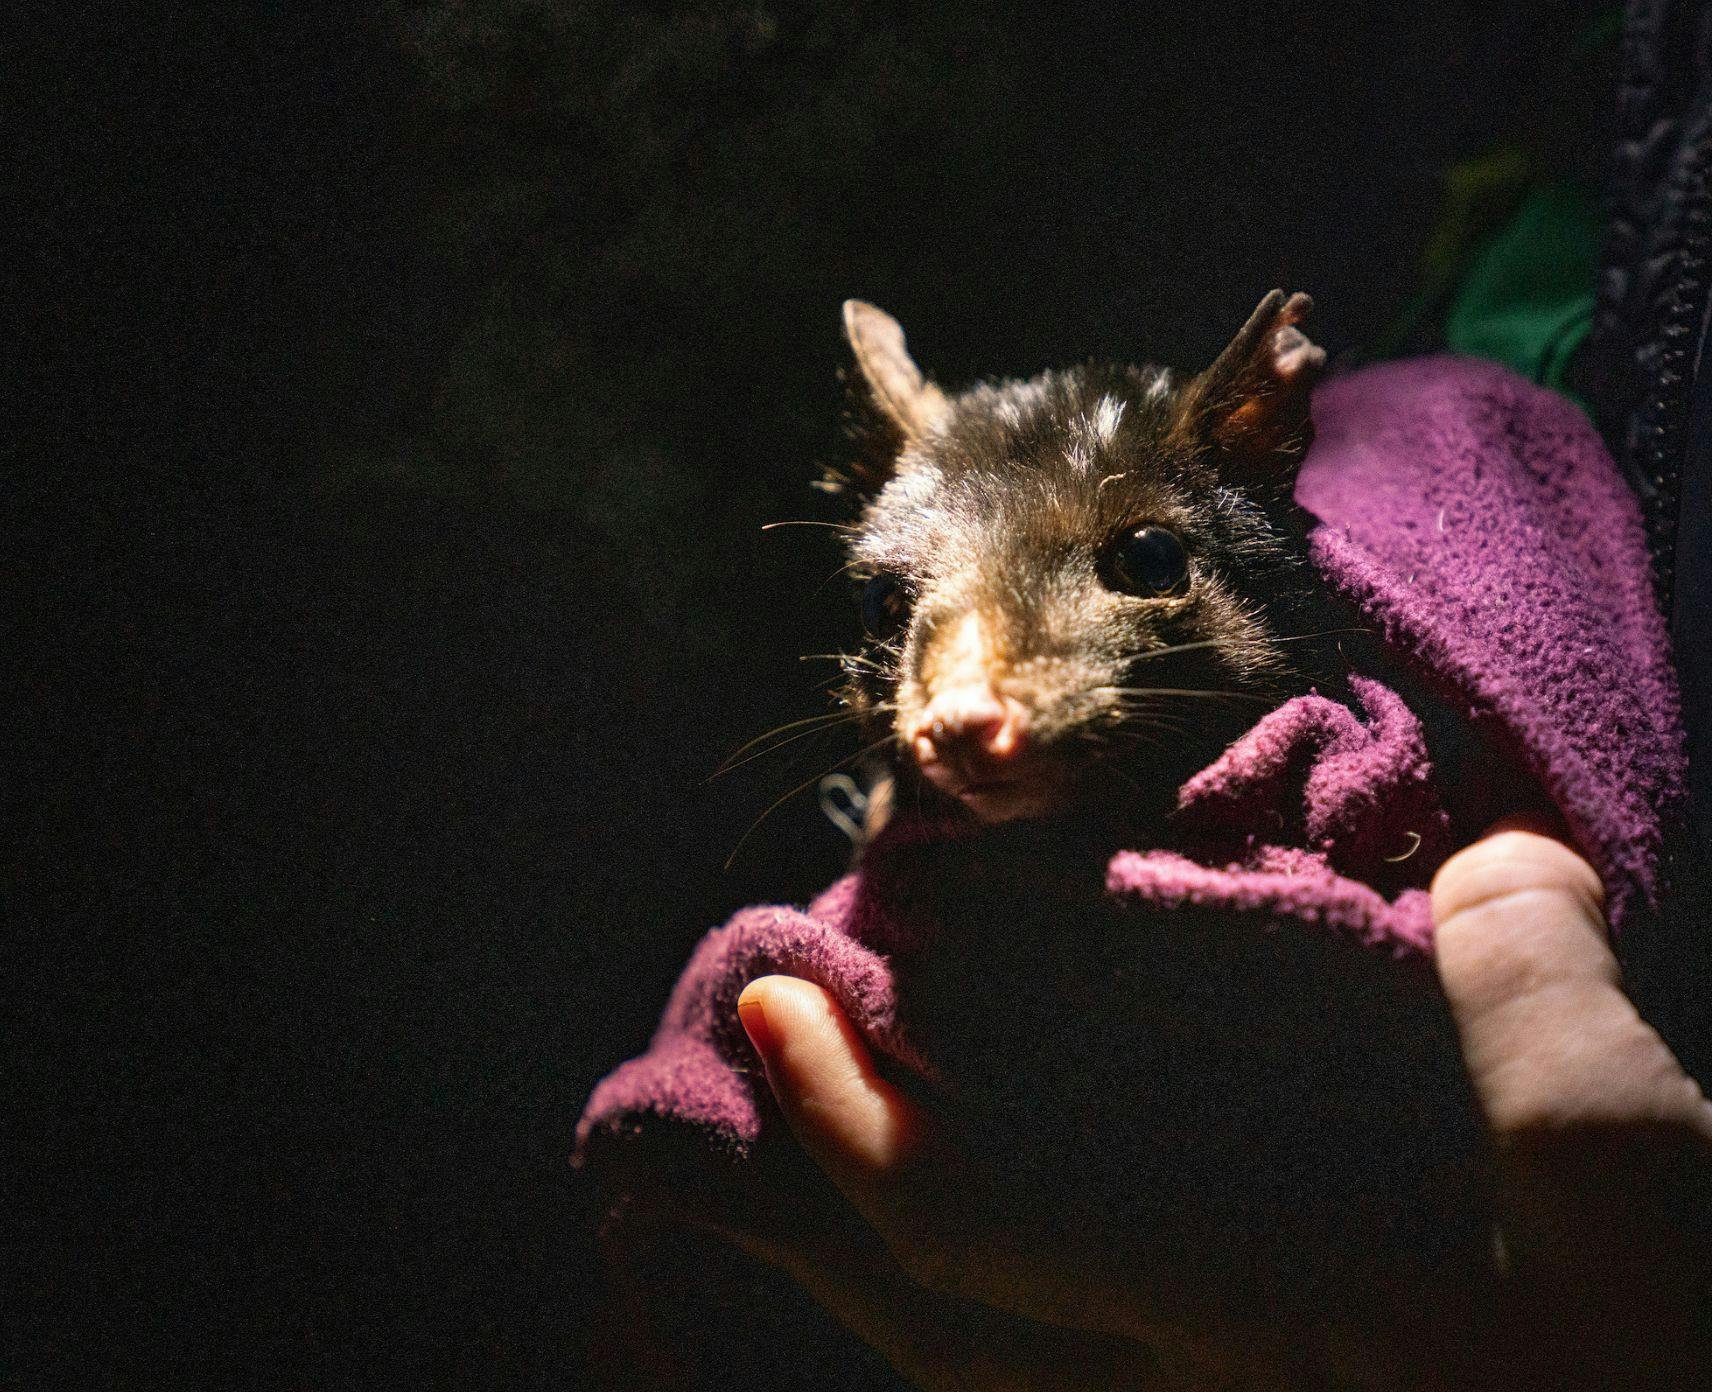 An eastern quoll is held during monitoring at Mulligans Flat.